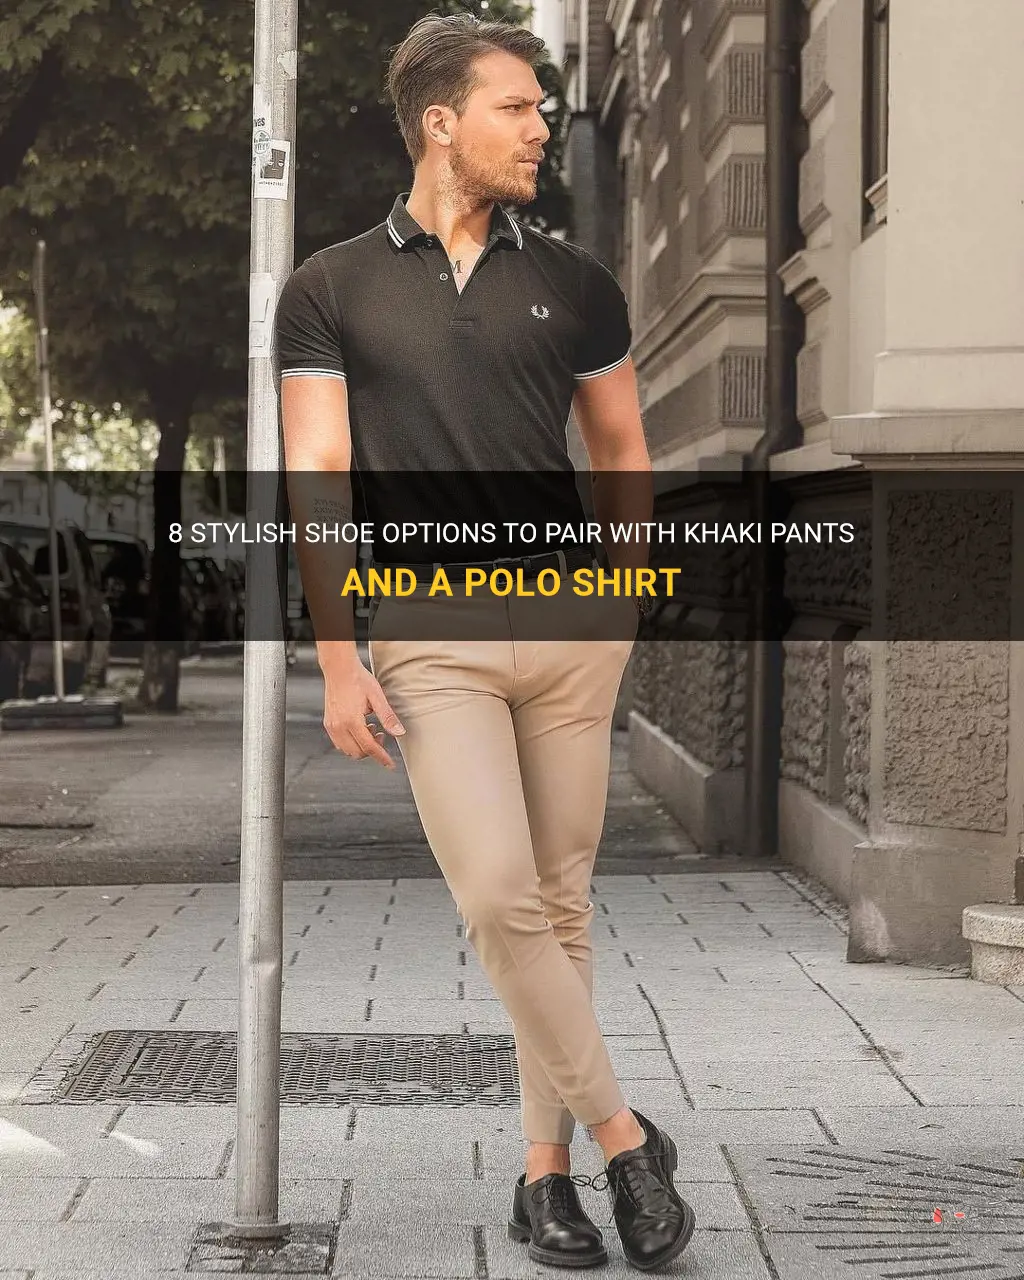 shoes to wear with khaki pants and polo shirt